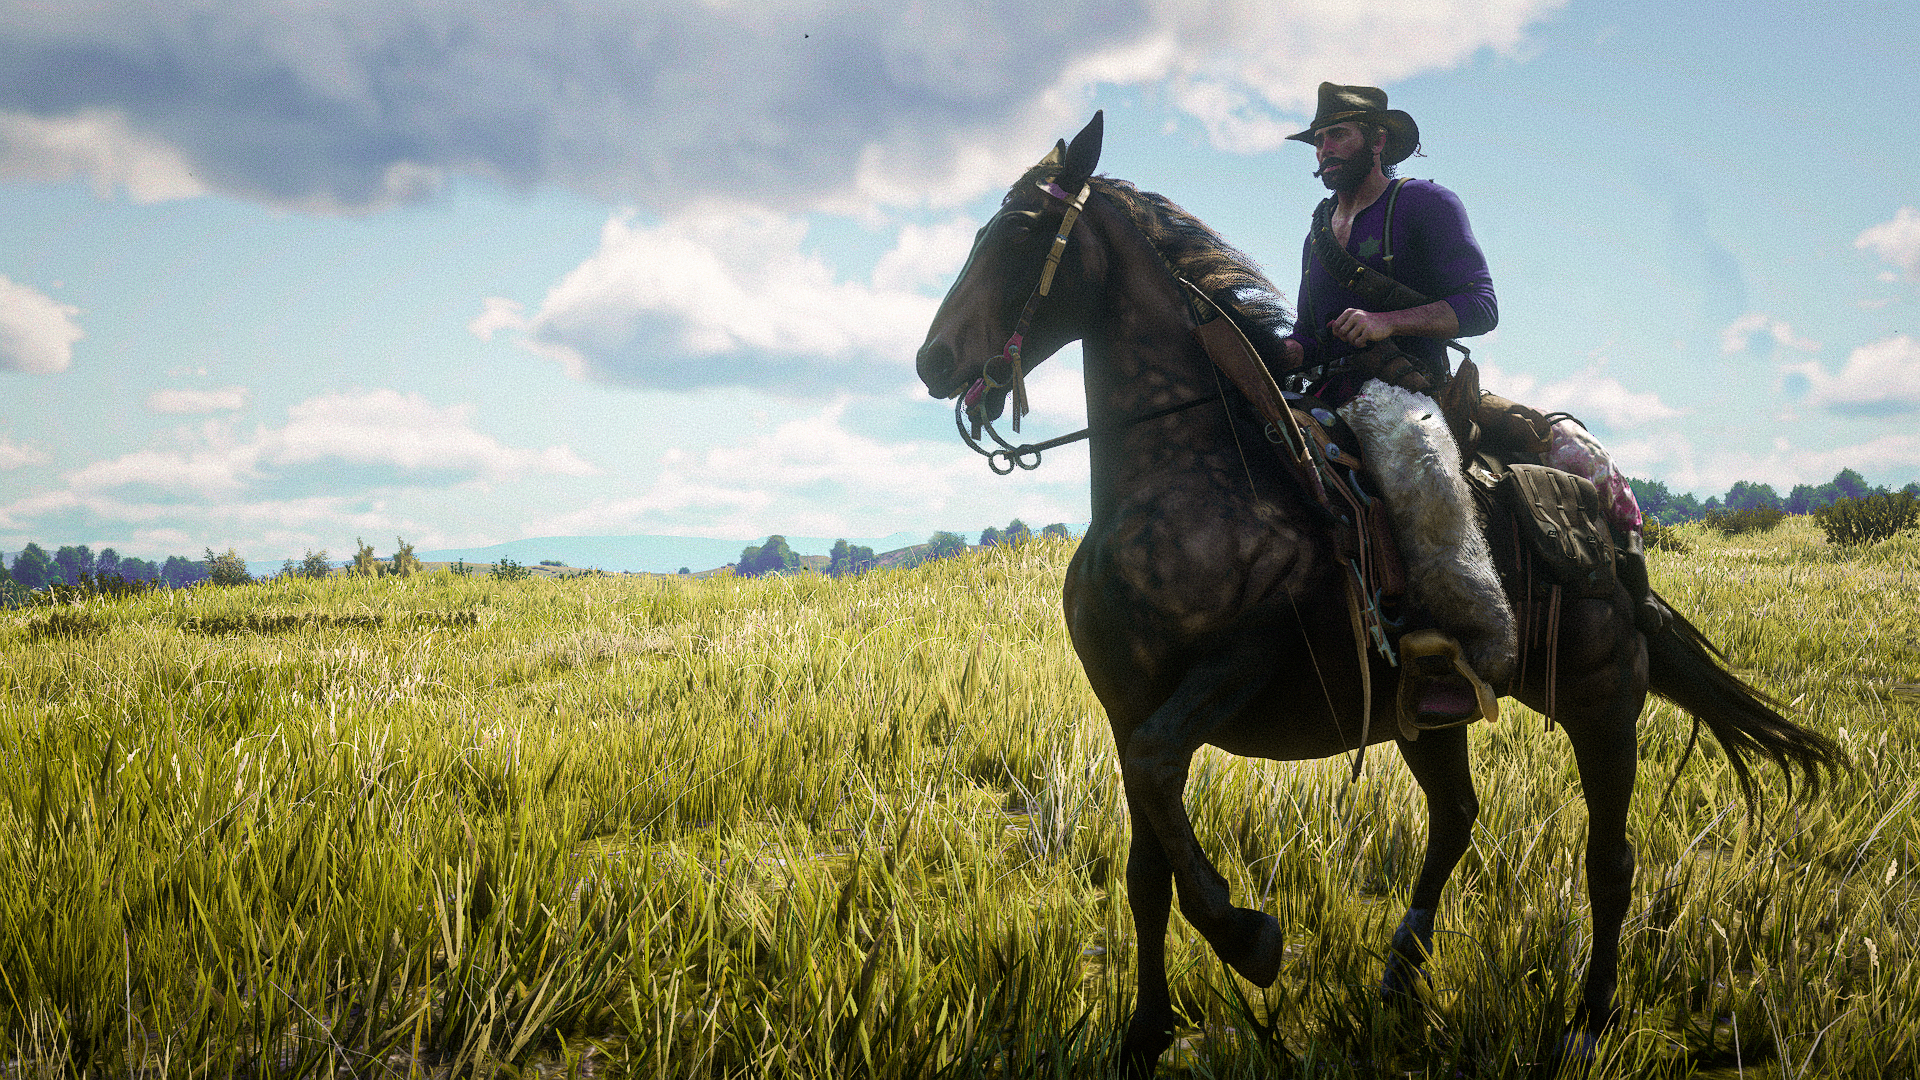 General 1920x1080 Red Dead Redemption 2 Rockstar Games Arthur Morgan horse video game characters PC gaming video games digital art